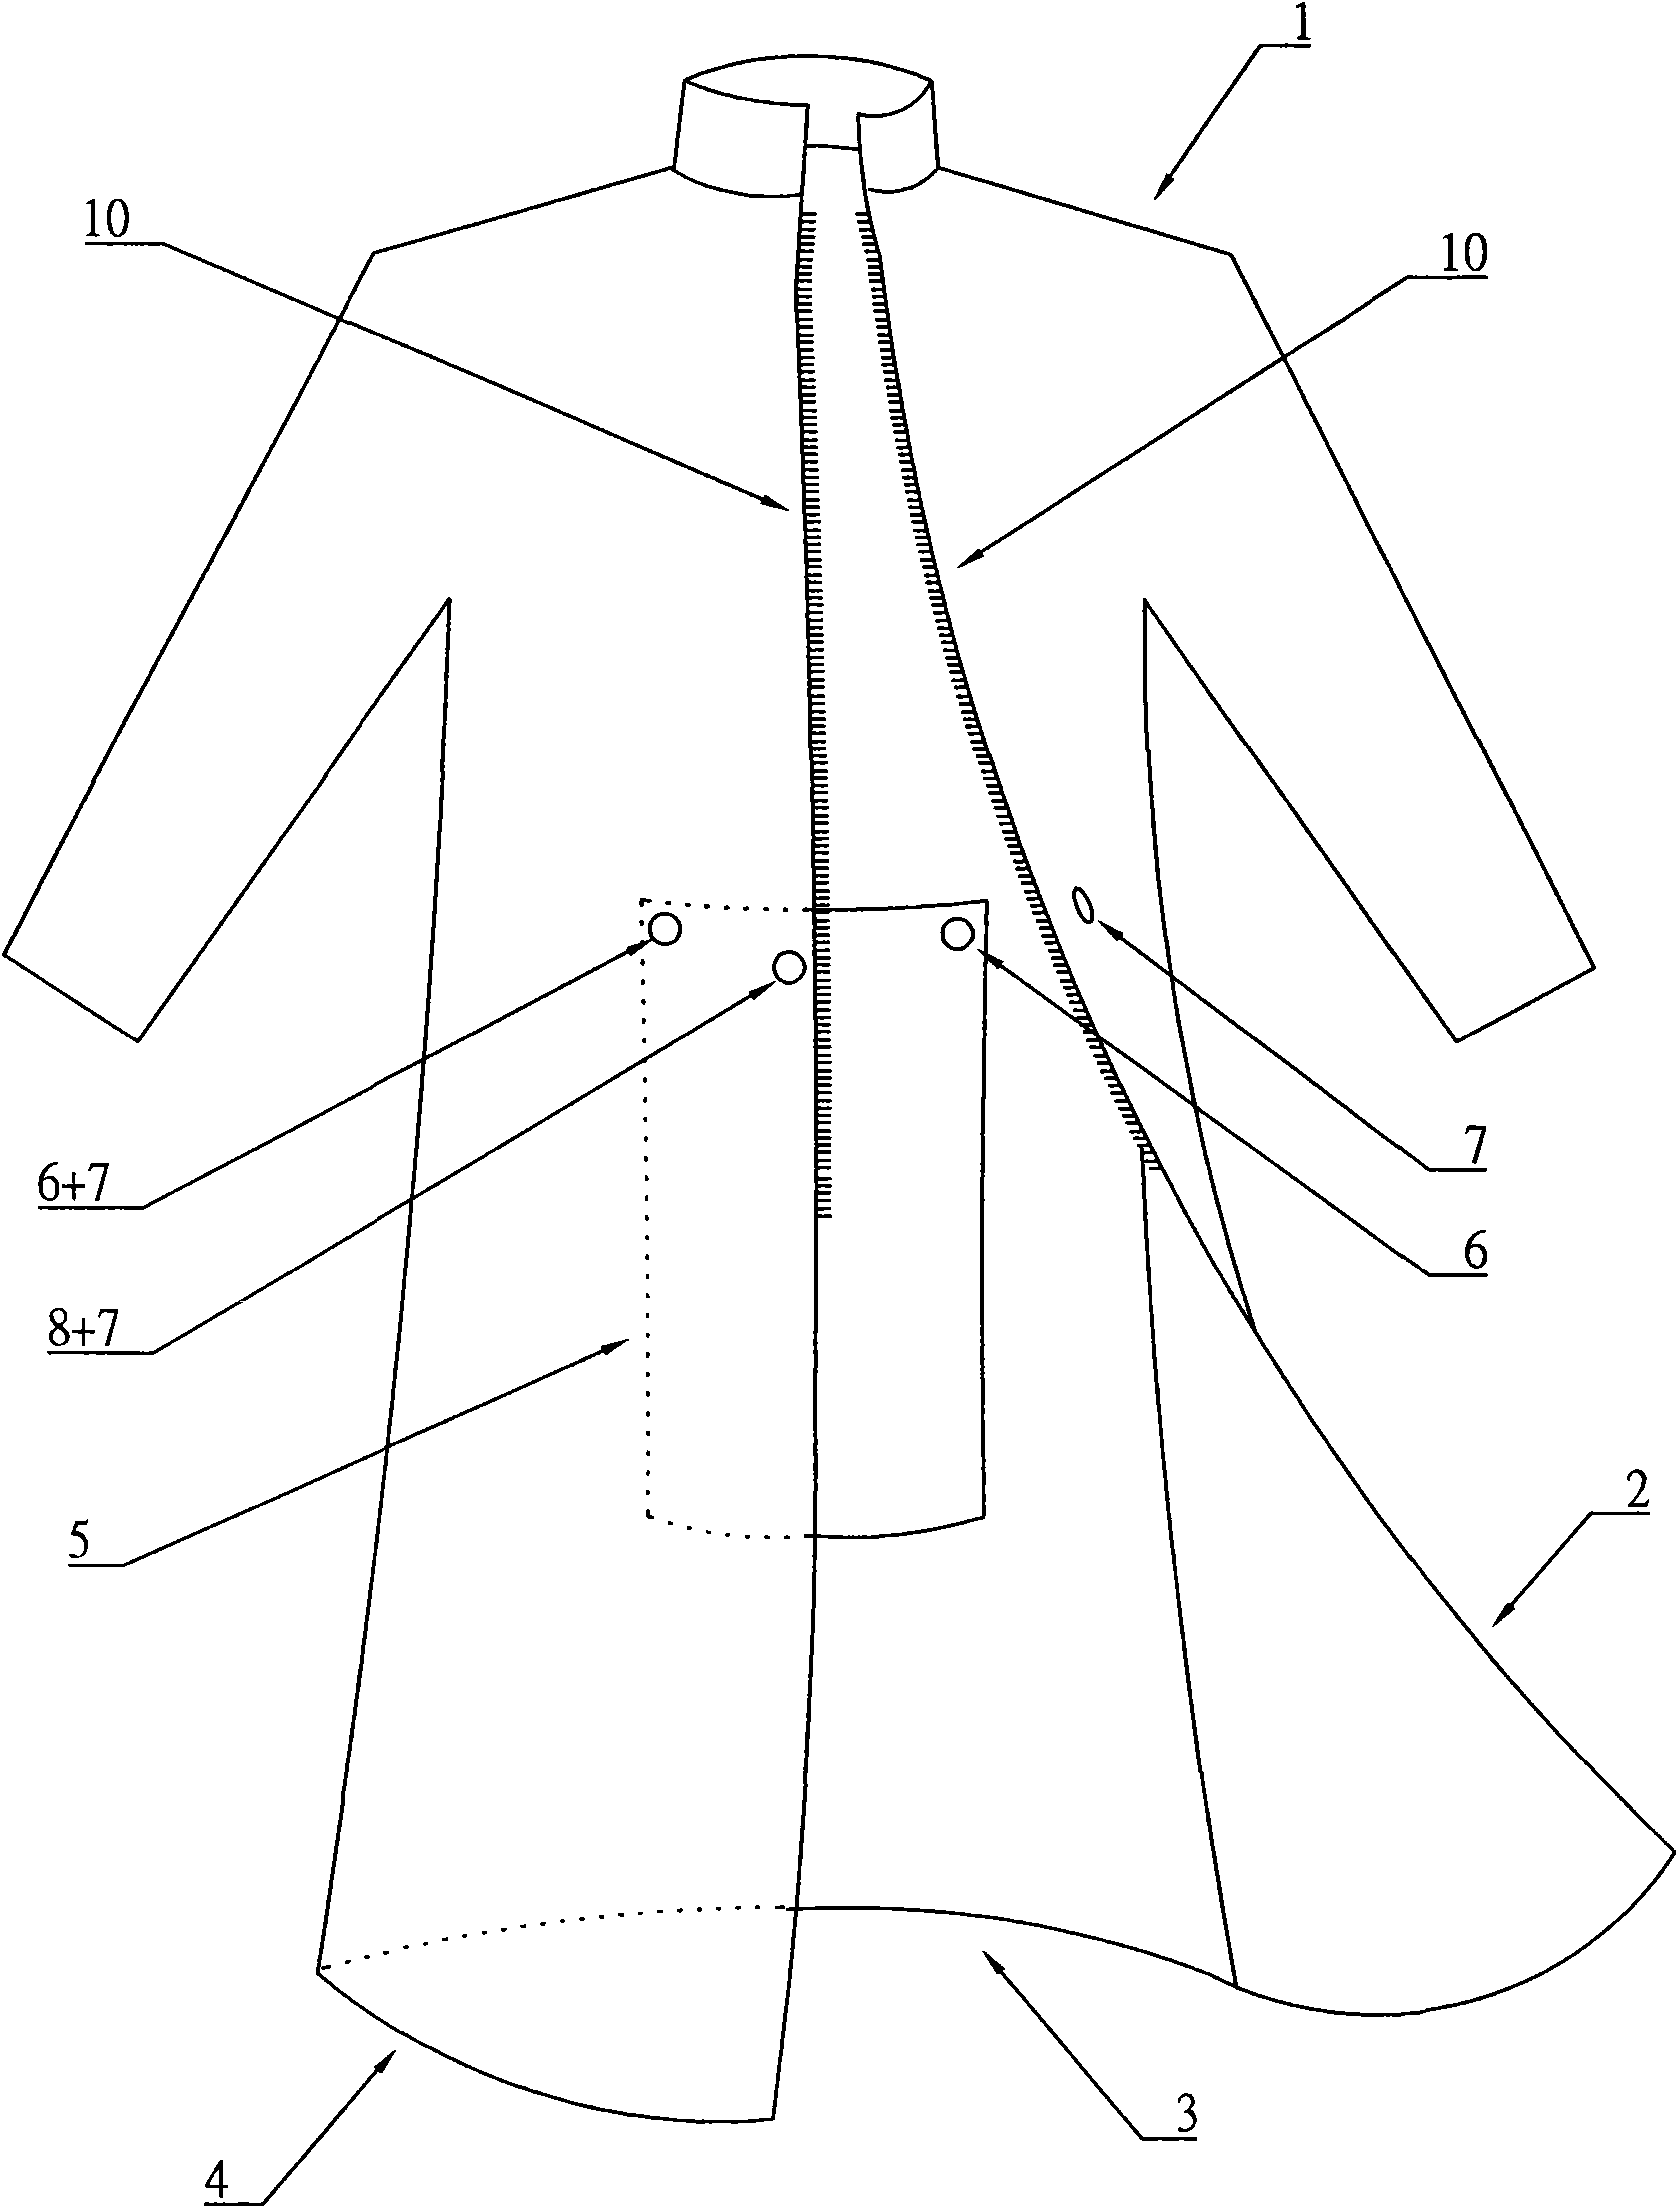 Shielding plate structure of open-fronted raincoat